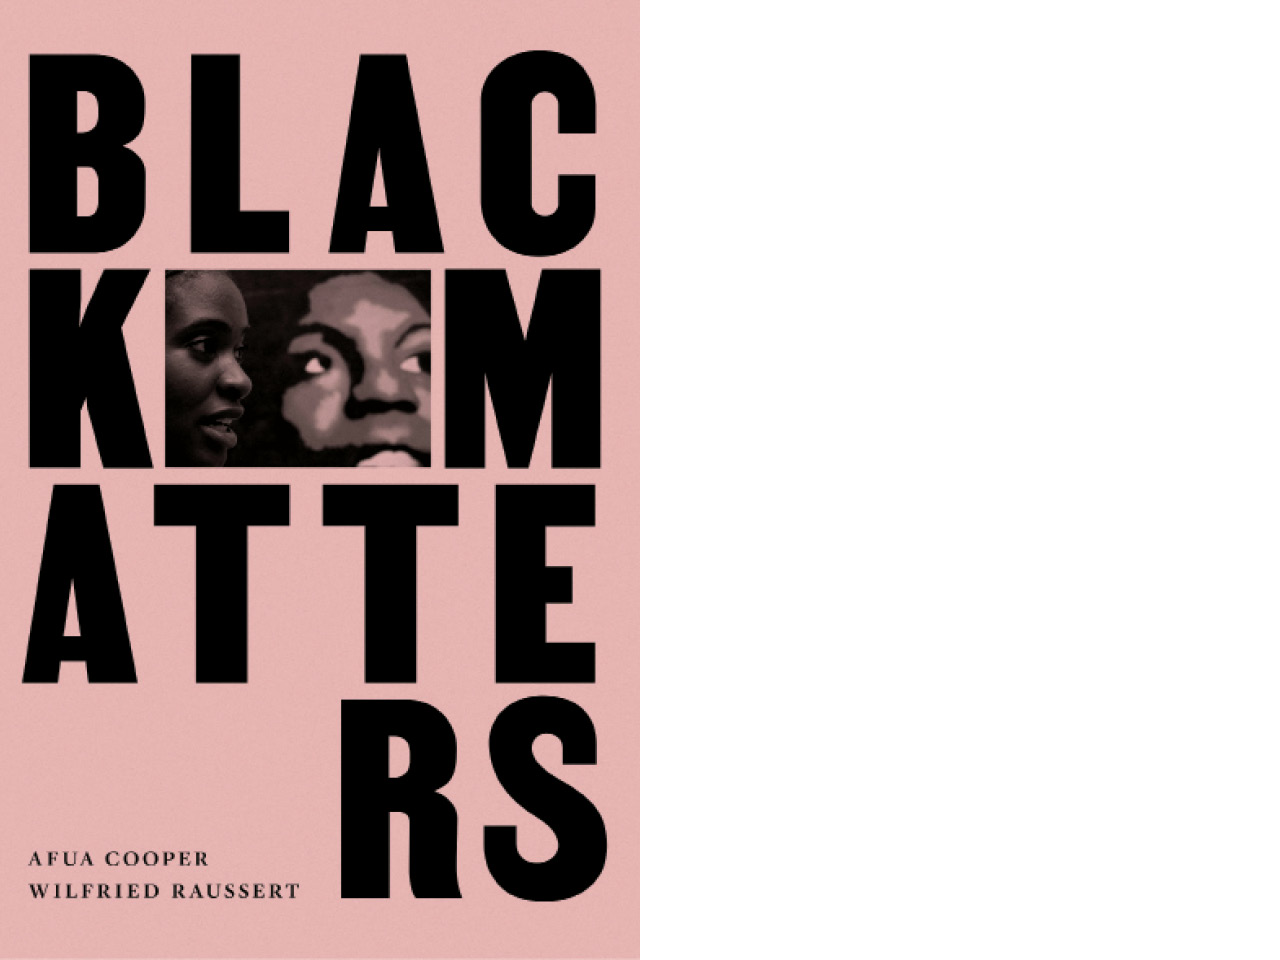 The cover of Black Matters